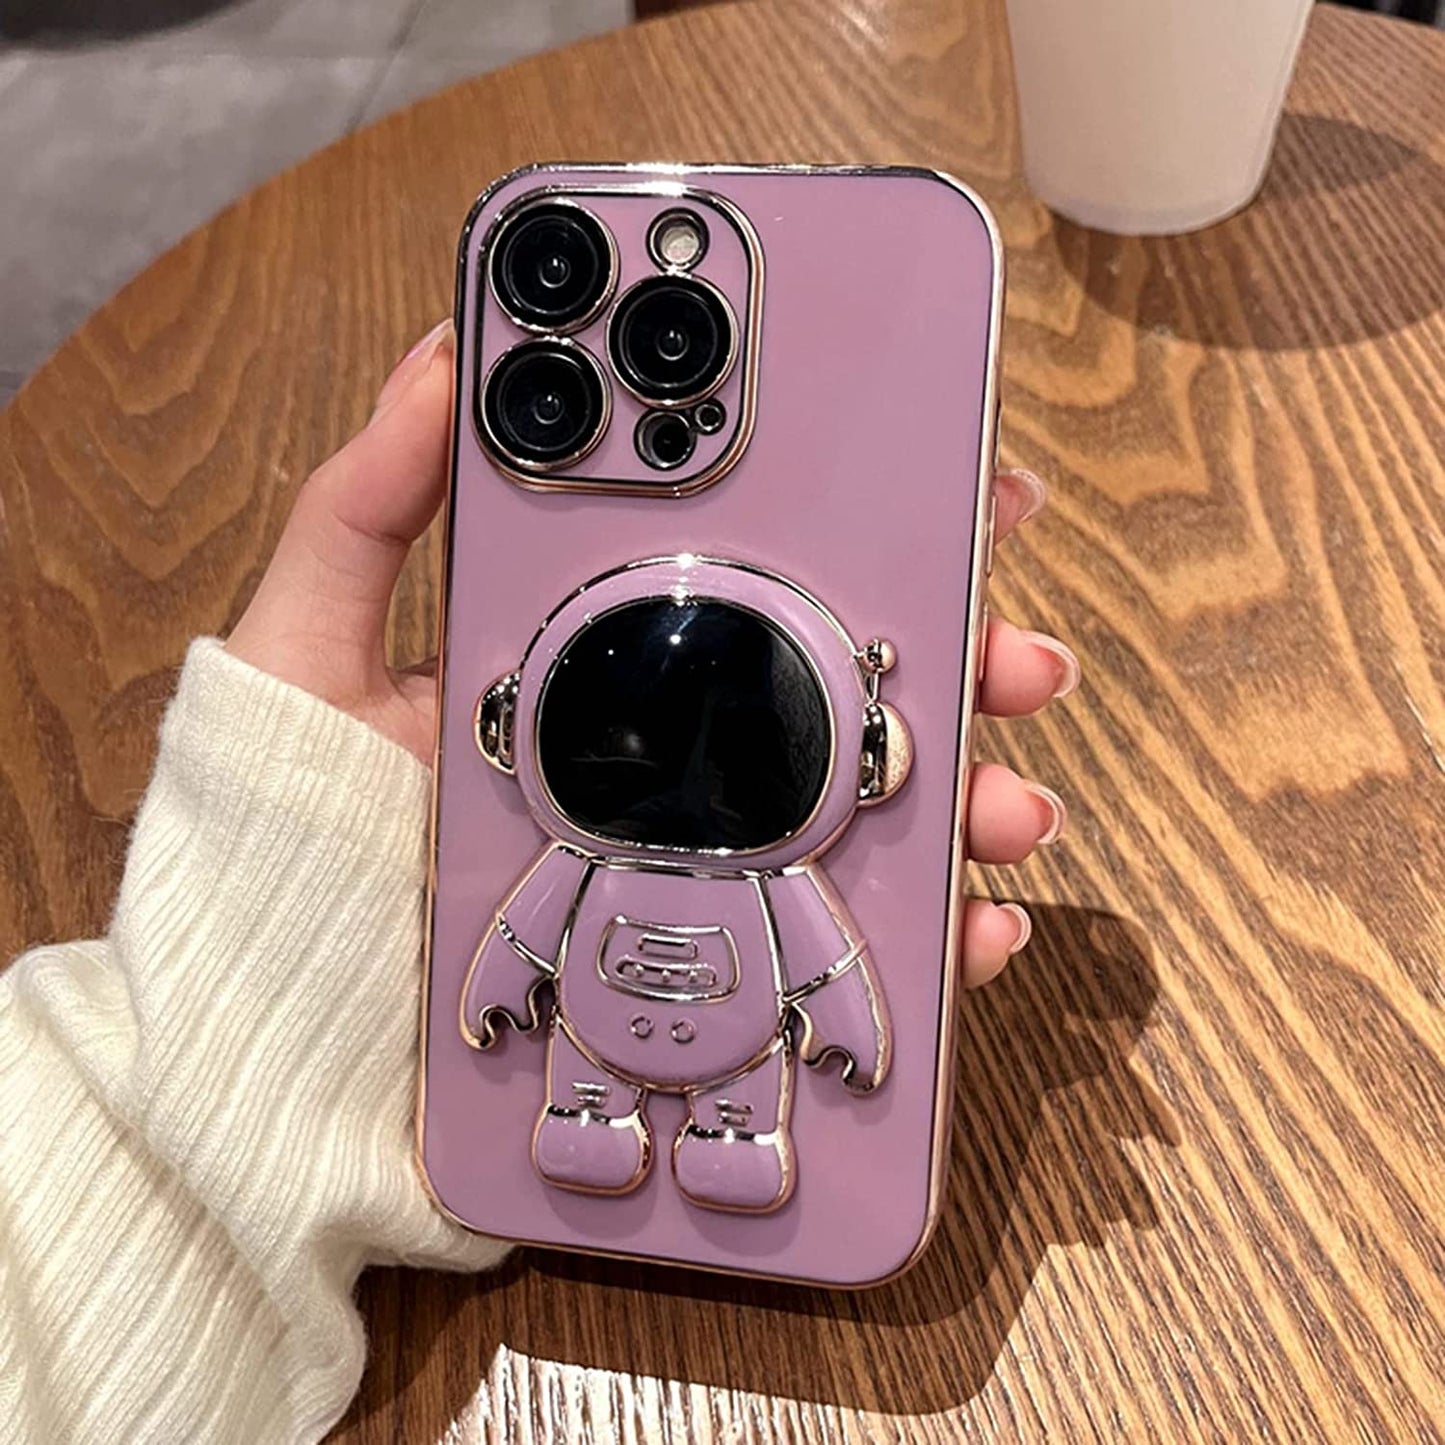 Luxury Plating 3D Astronaut Folding Stand Case For iPhone 11 12 13 Pro Max